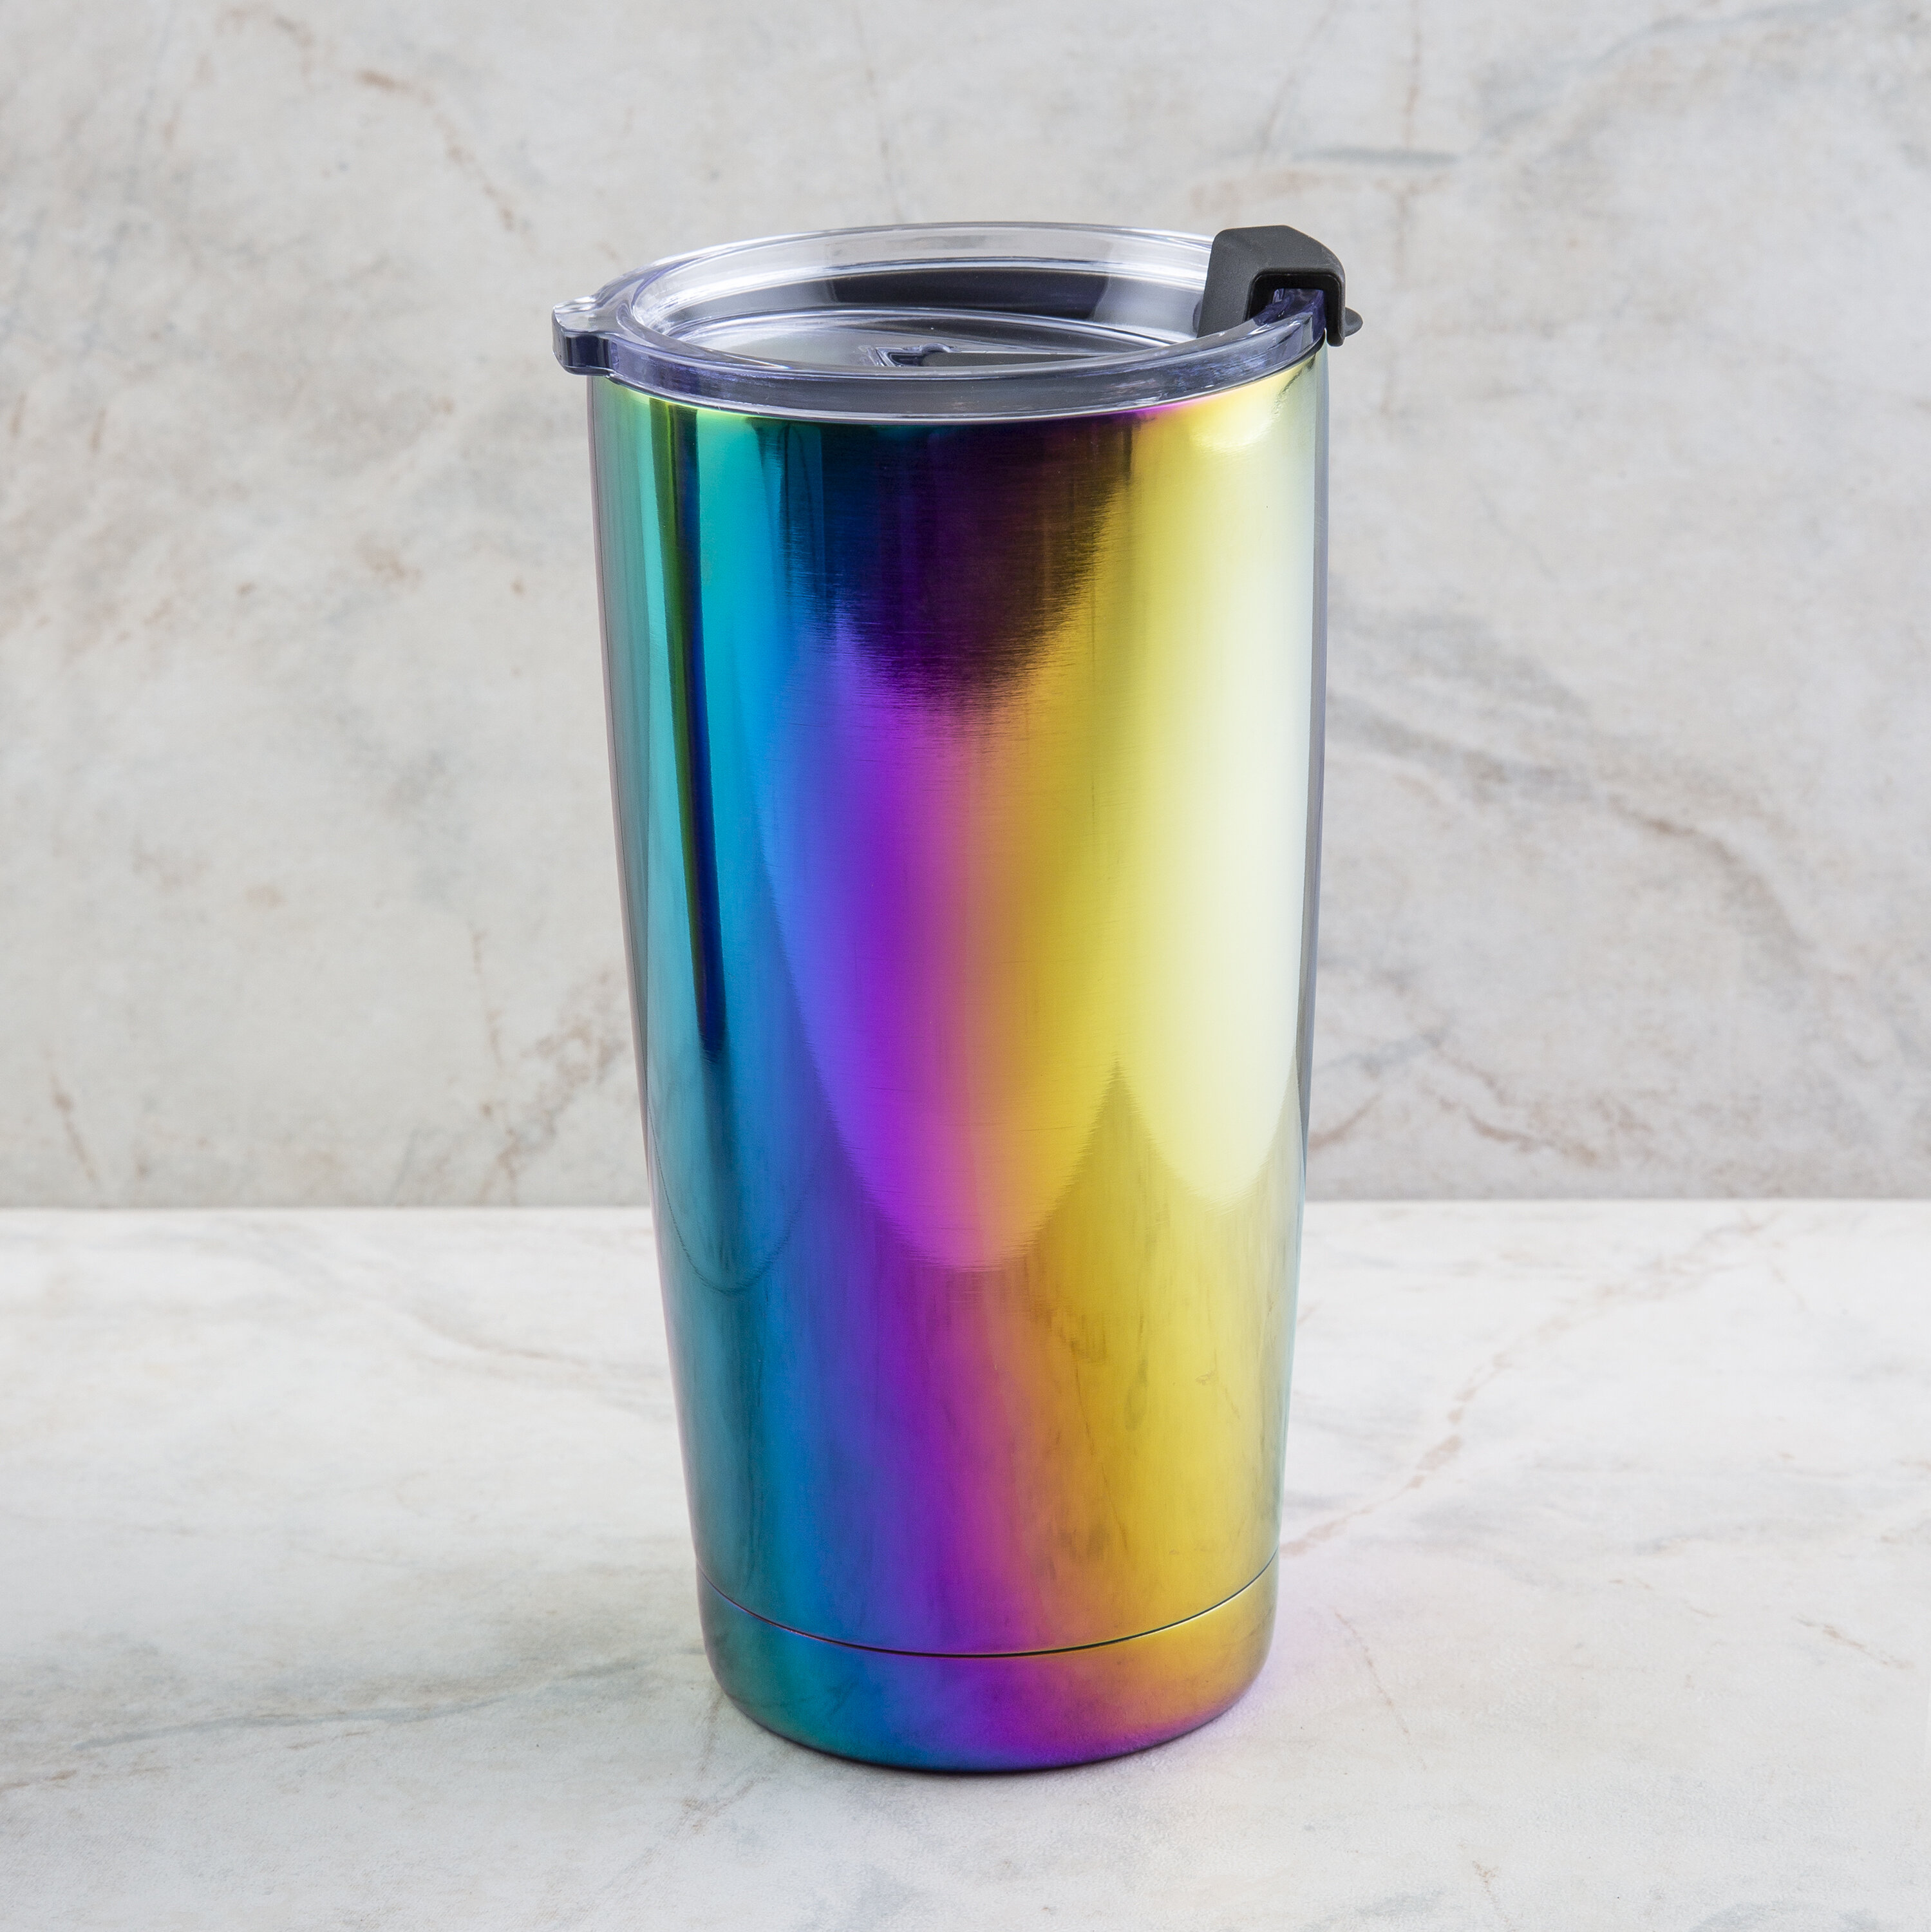 20 oz Iridescent Pipette Stainless Steel Tumber